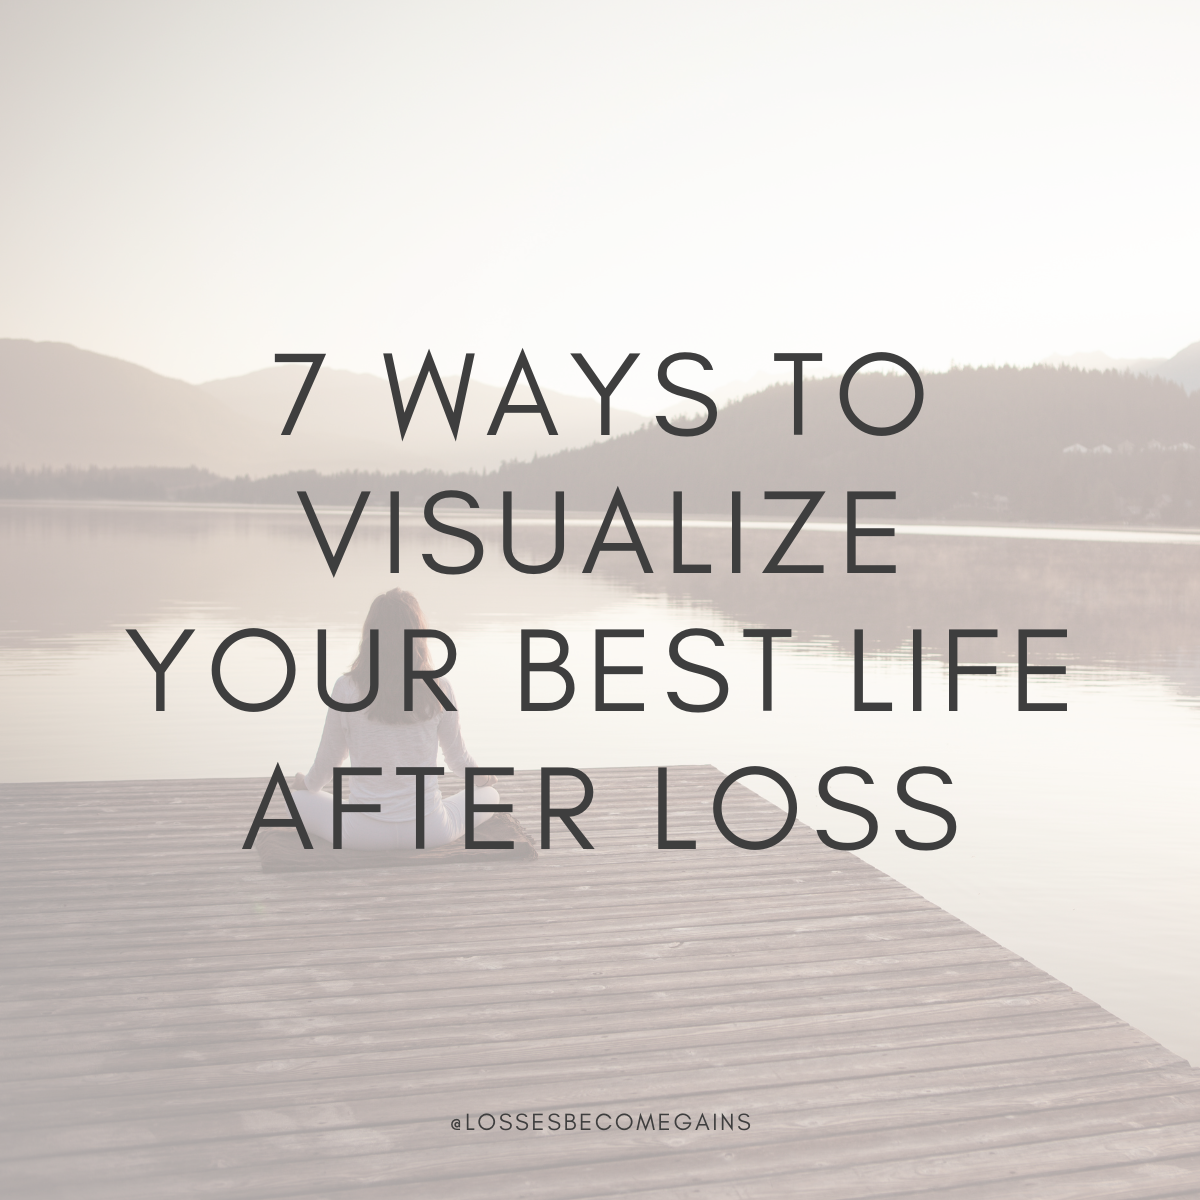 7 Ways to Visualize Your Best Life After Loss by Losses Become Gains